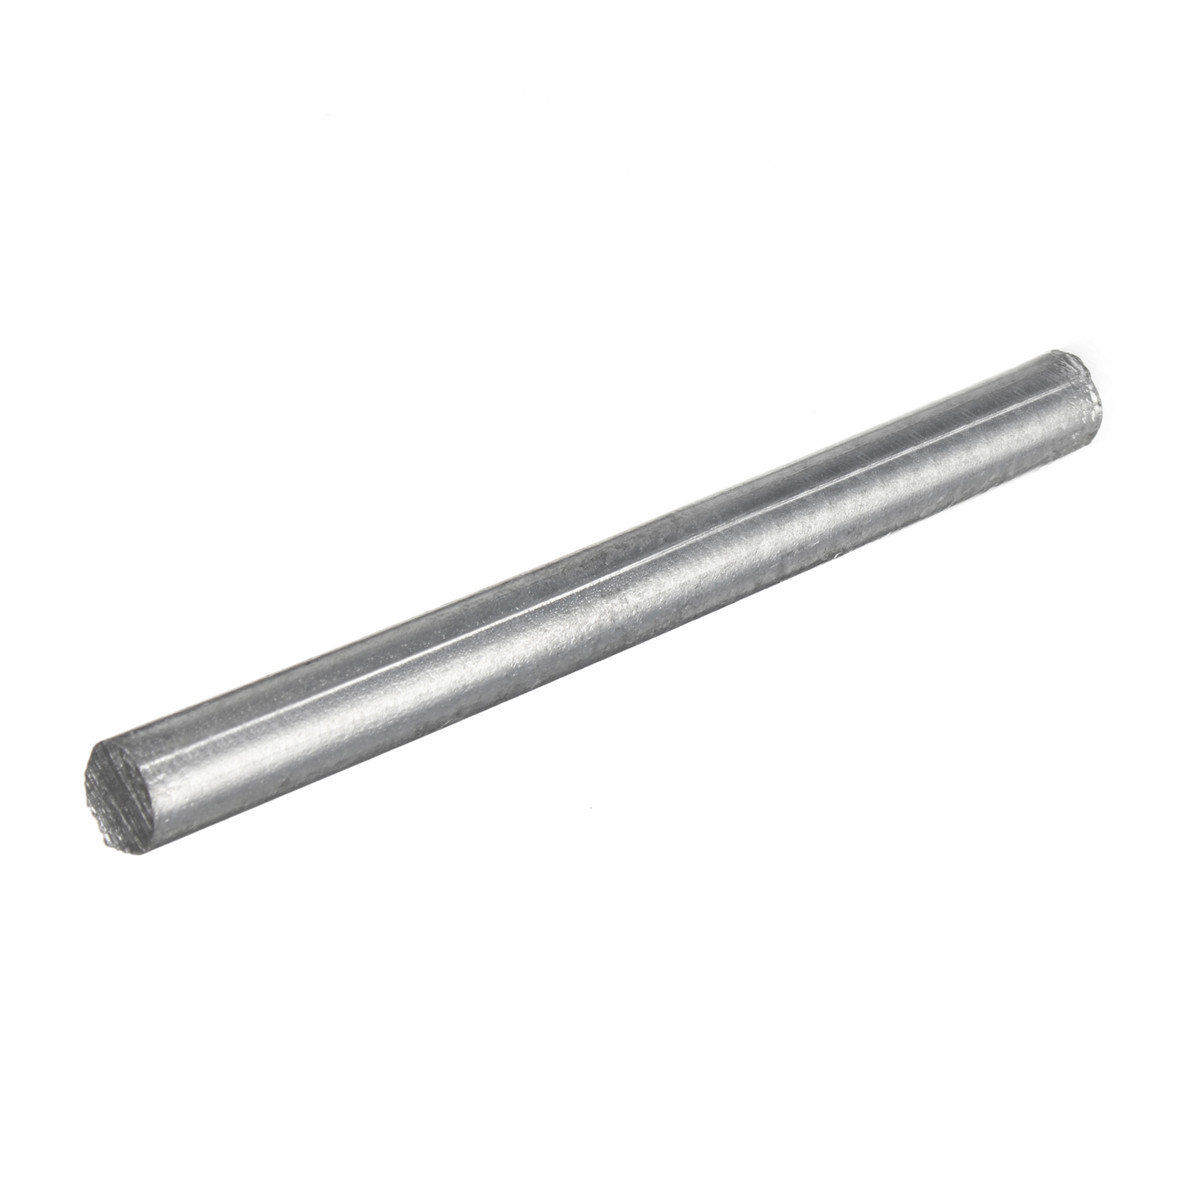 0.4"x 4" Purity Zn 99.95% Zinc Rods Anode Electroplating Solid Round Bar Durable Universal for Anode Electroplating Zinc Plating